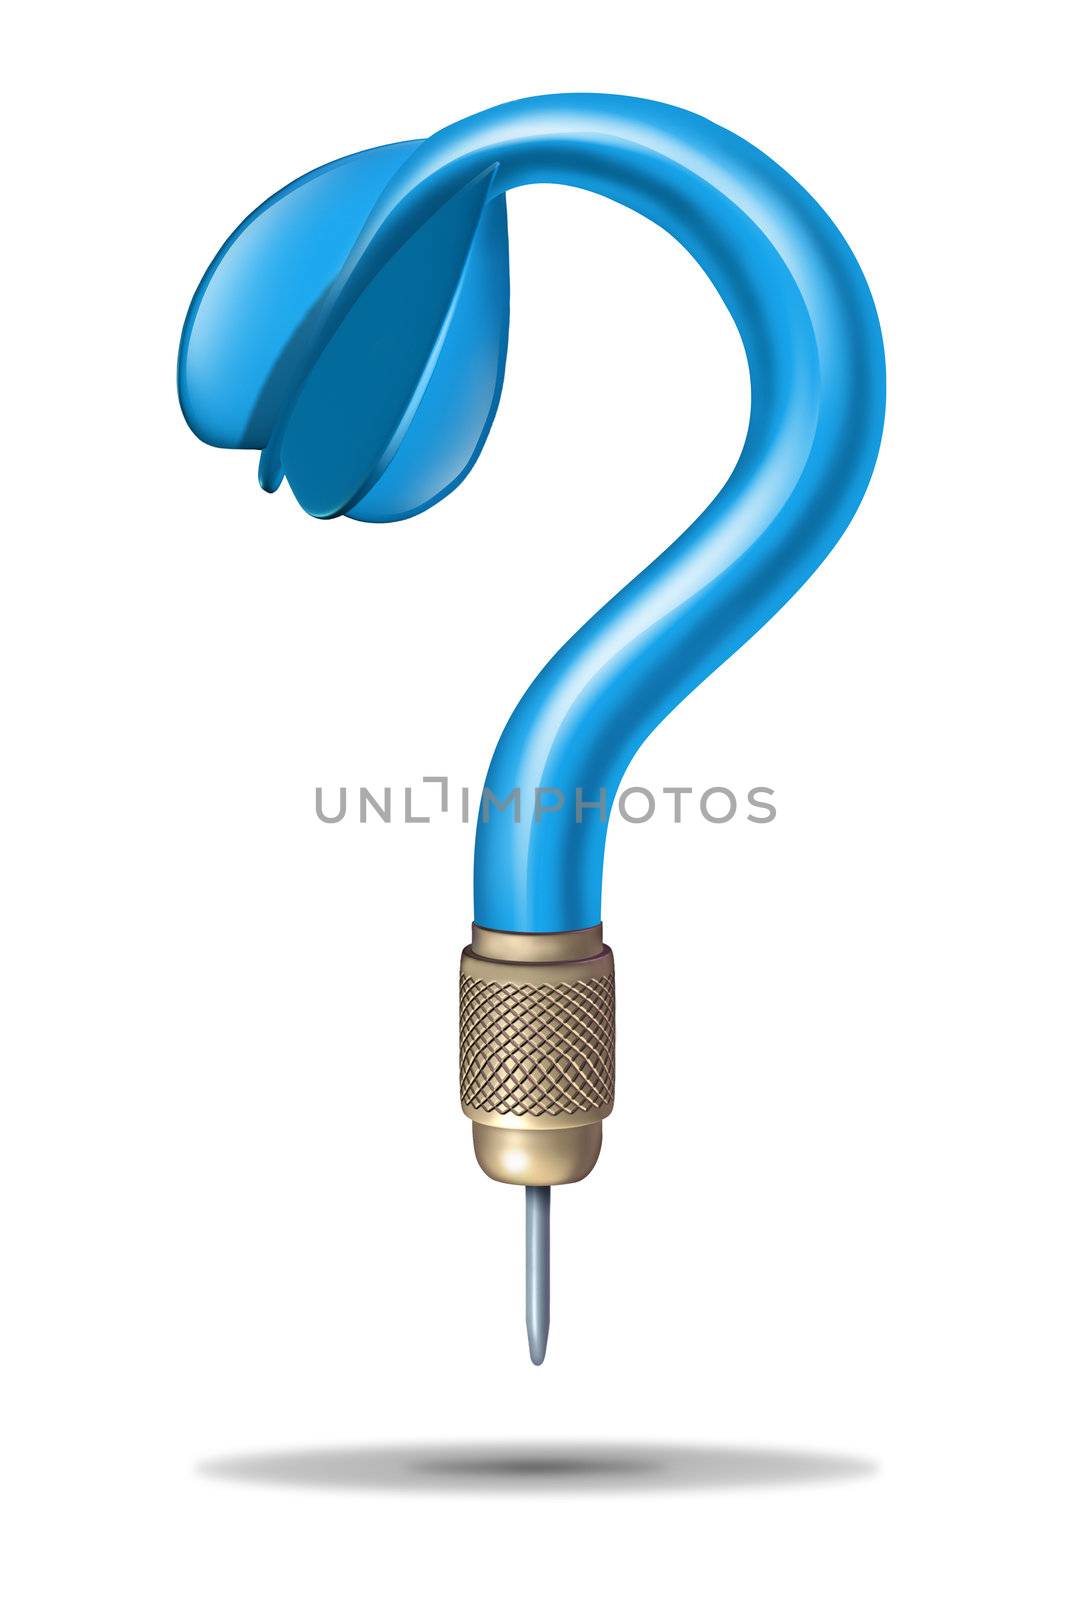 Strategy questions with a blue dart in the shape of a question mark as a business or health symbol of uncertainty and confusion in deciding where to aim and target the right goals to find answers and solutions.